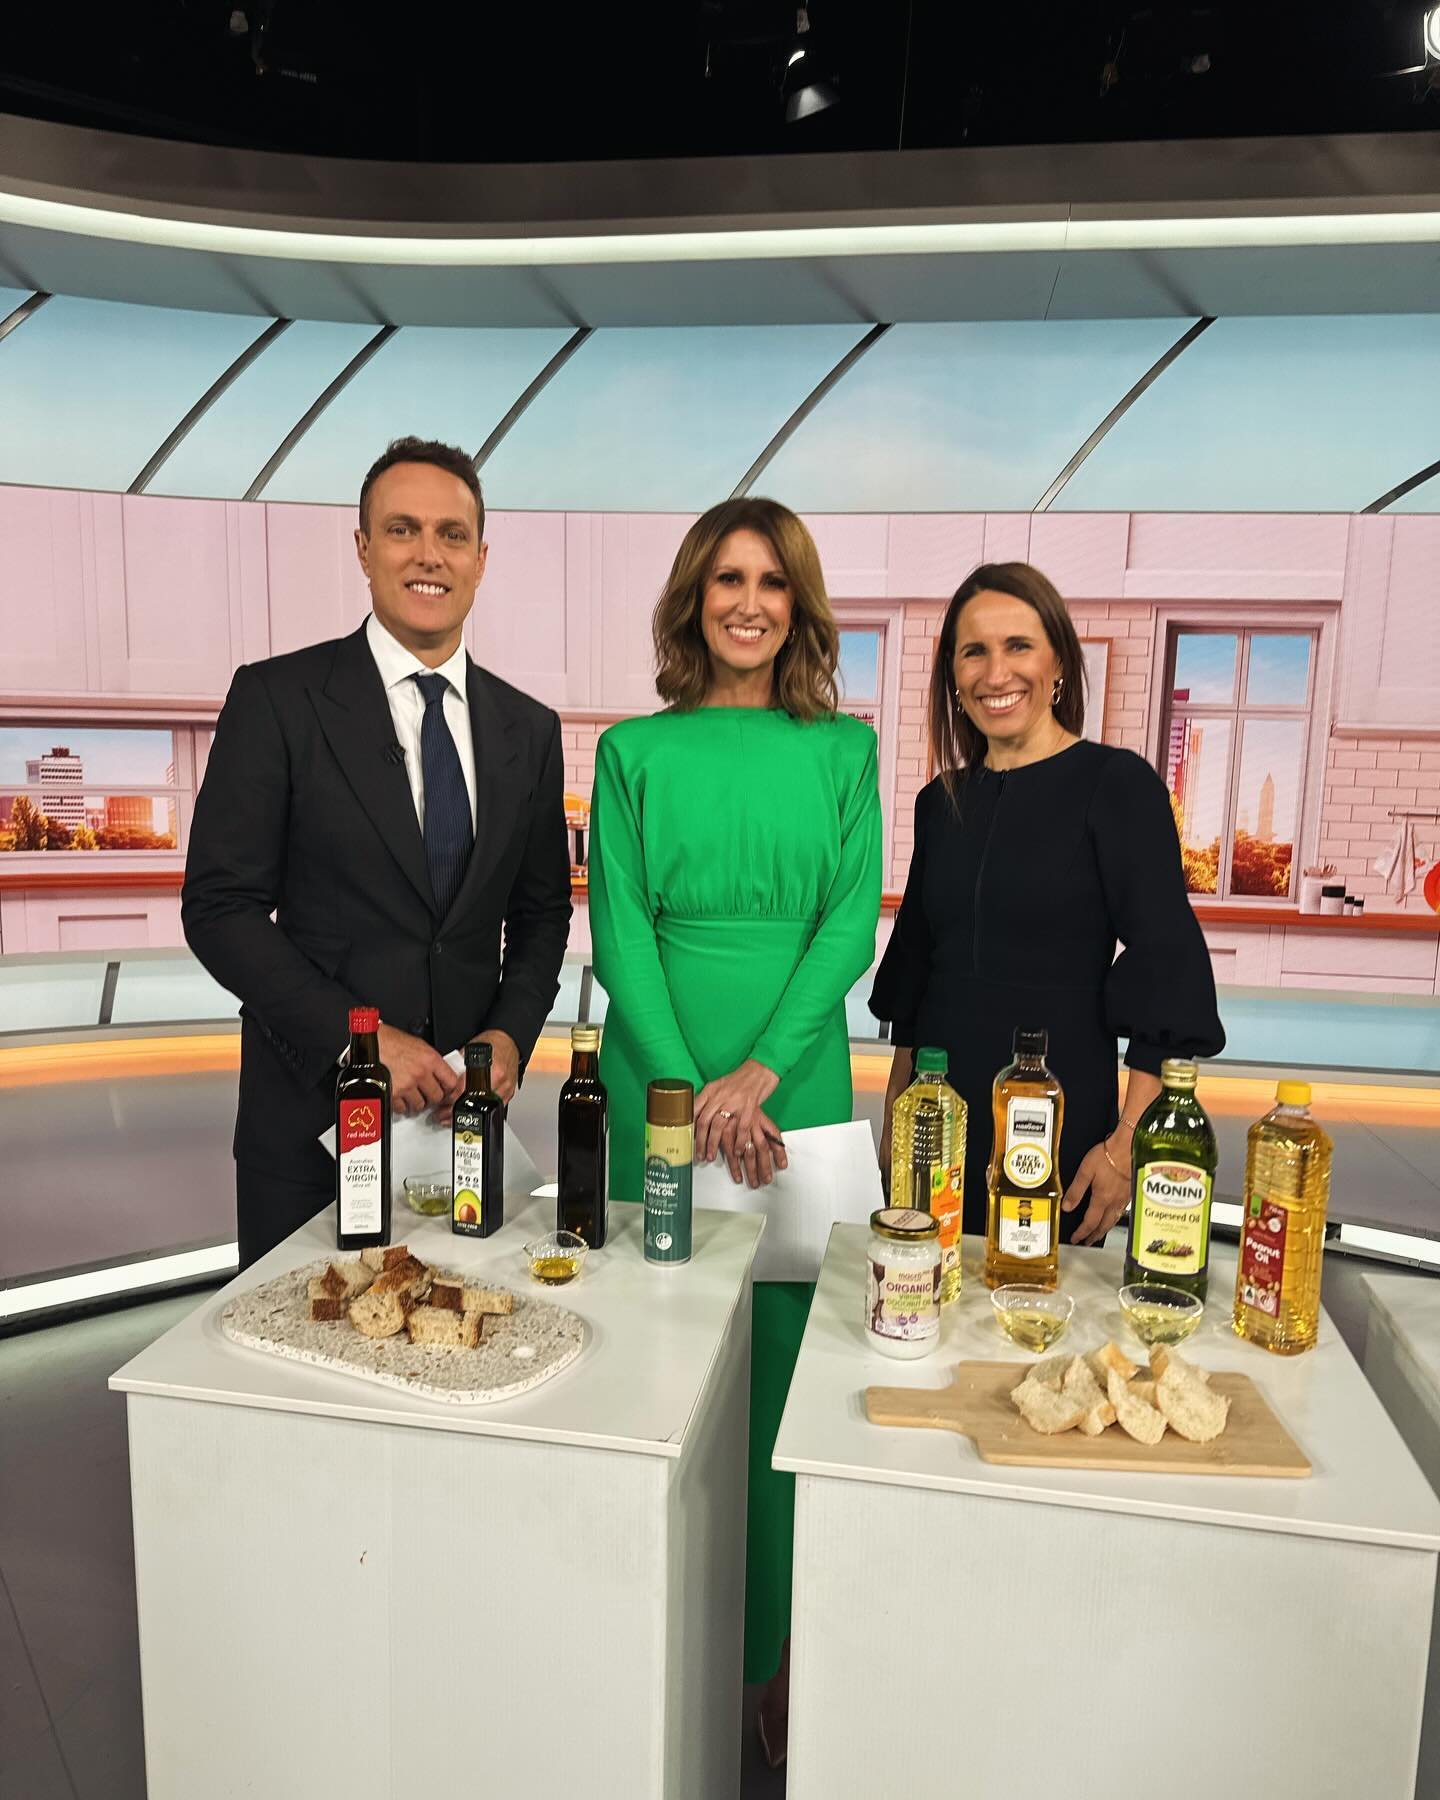 🫒Today was all about oils - which are best to cook with. It was a super fun segment with @mattshirvo downing avocado oil and @natalie_barr7  being made to drink rice bran oil 😆😆

To determine how &ldquo;healthy&rdquo; an oil is I came up with thes